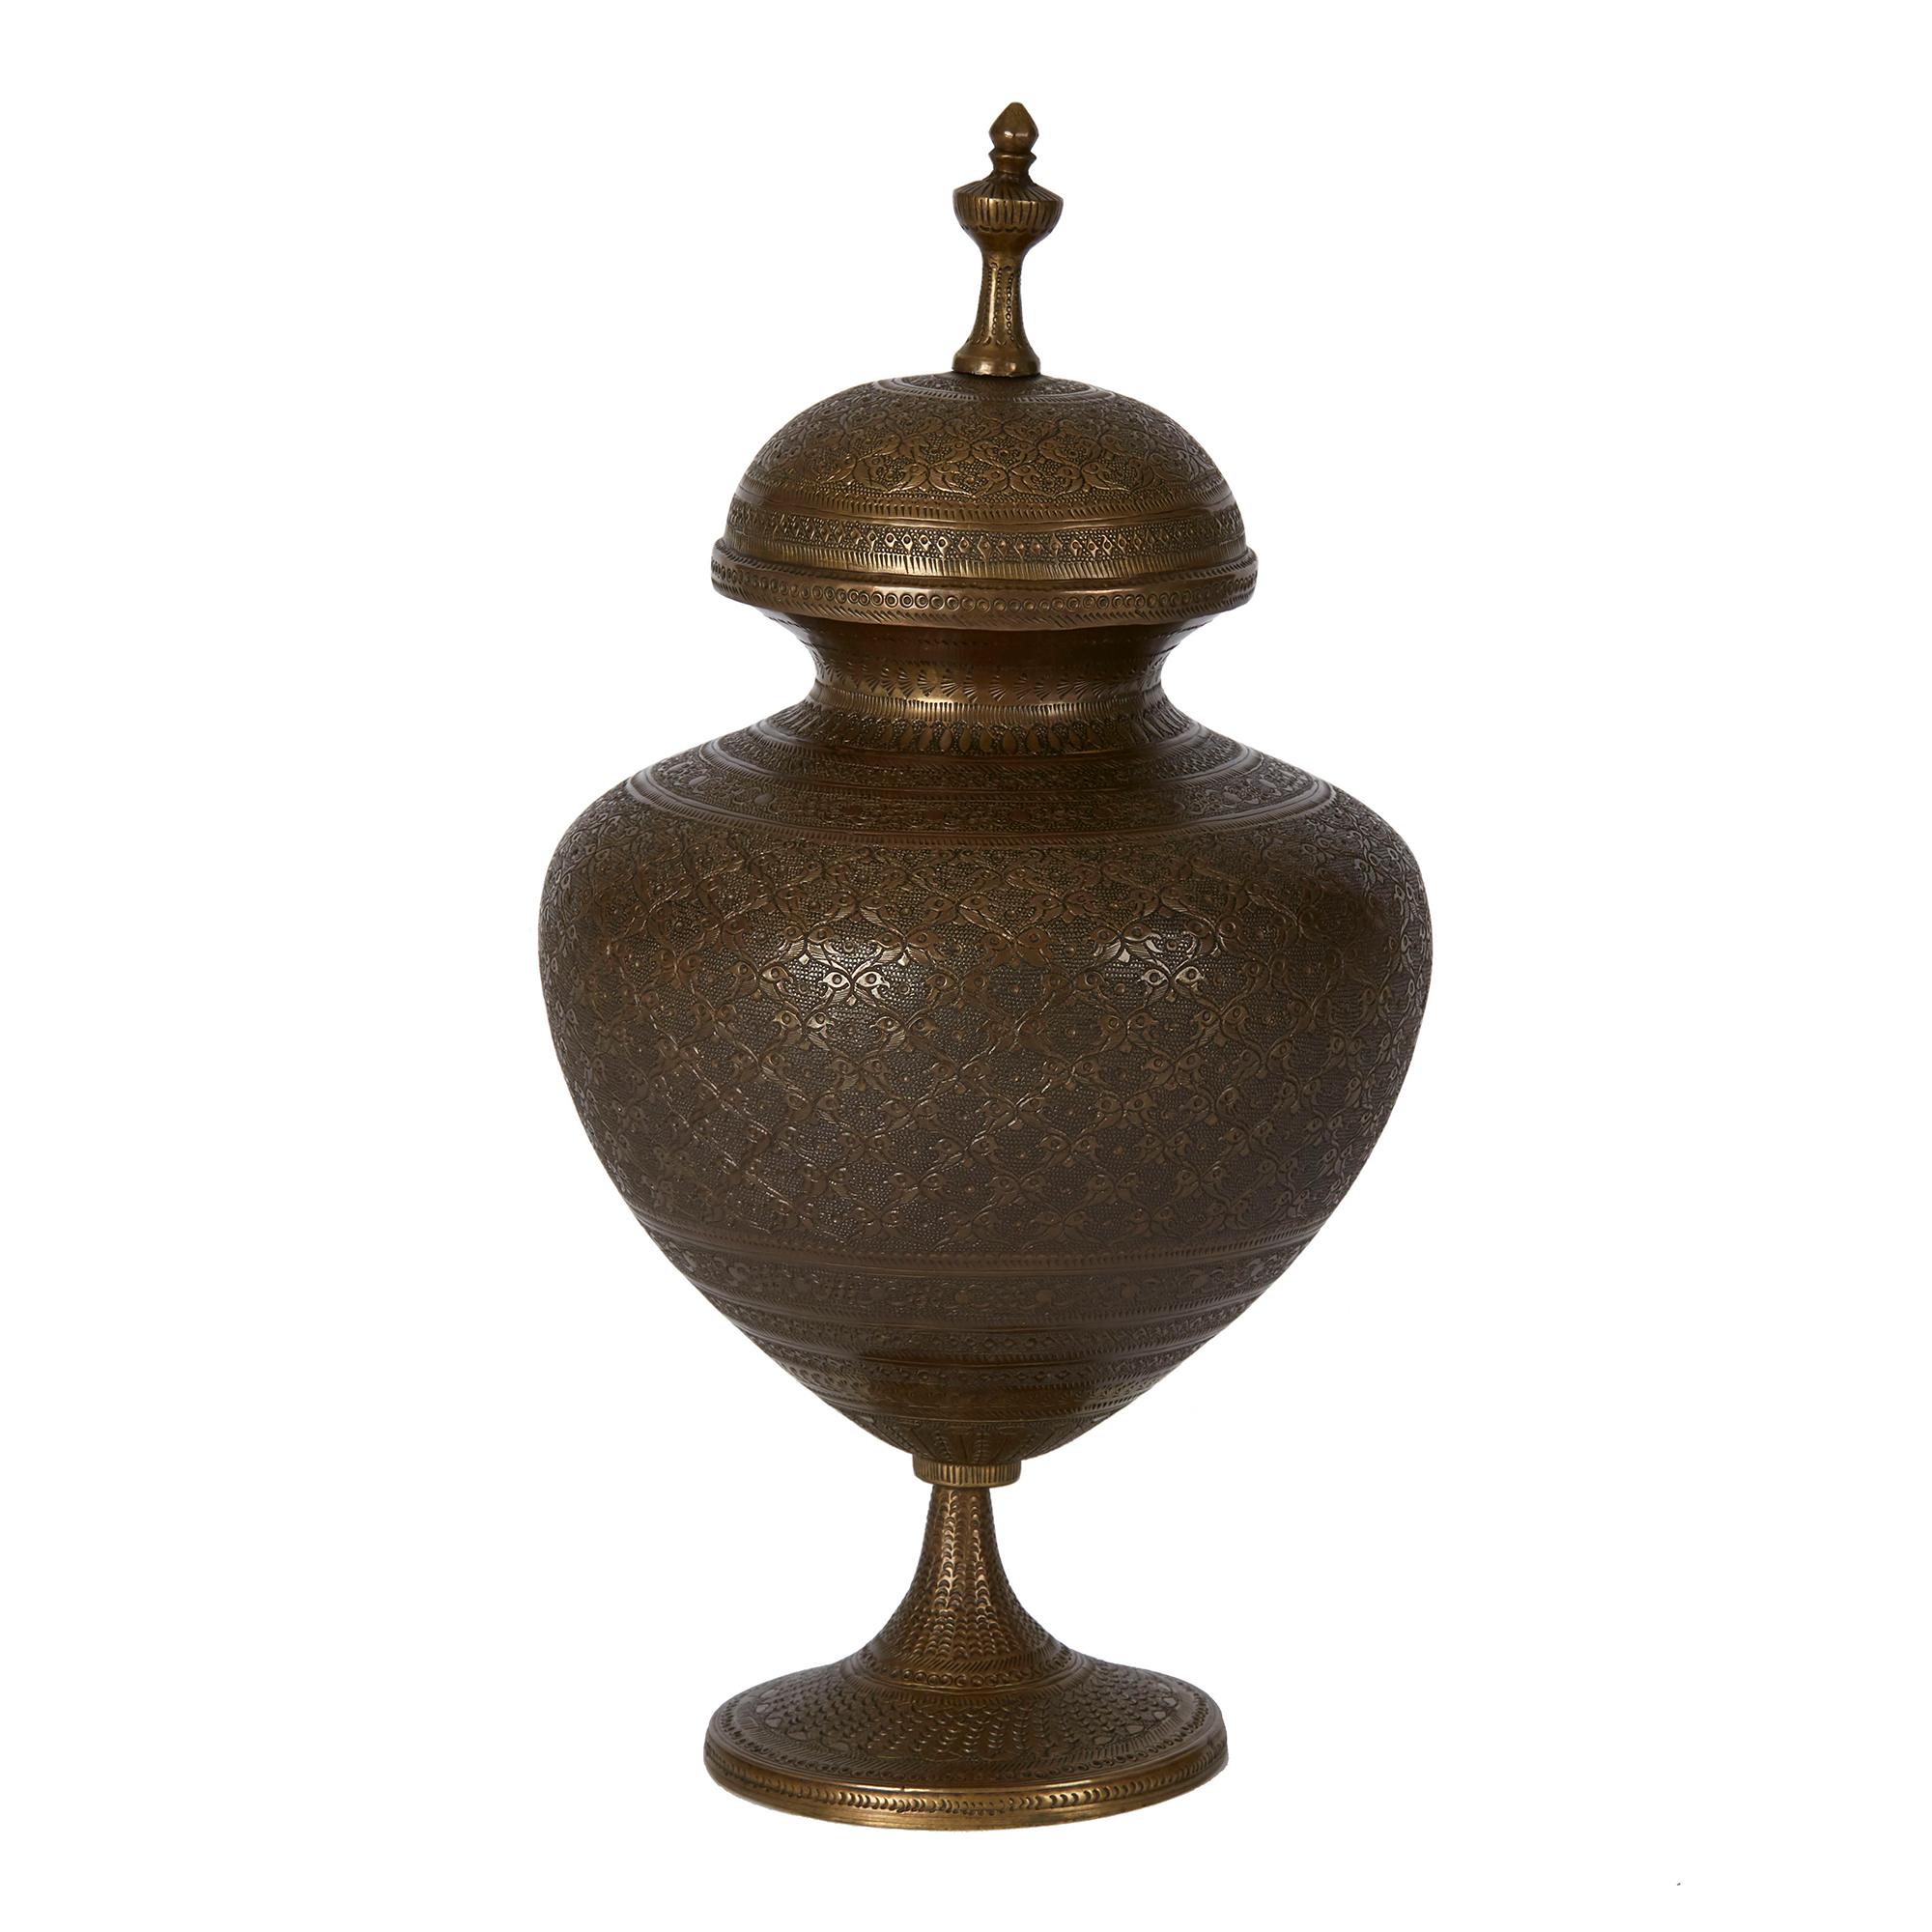 An impressive antique Indo-Persian bronze lidded pedestal vase, the bulbous body extensively decorated with finely engraved patterning and fitted with a domed cover with raised finial and supported on a narrow pedestal base on a rounded and slightly